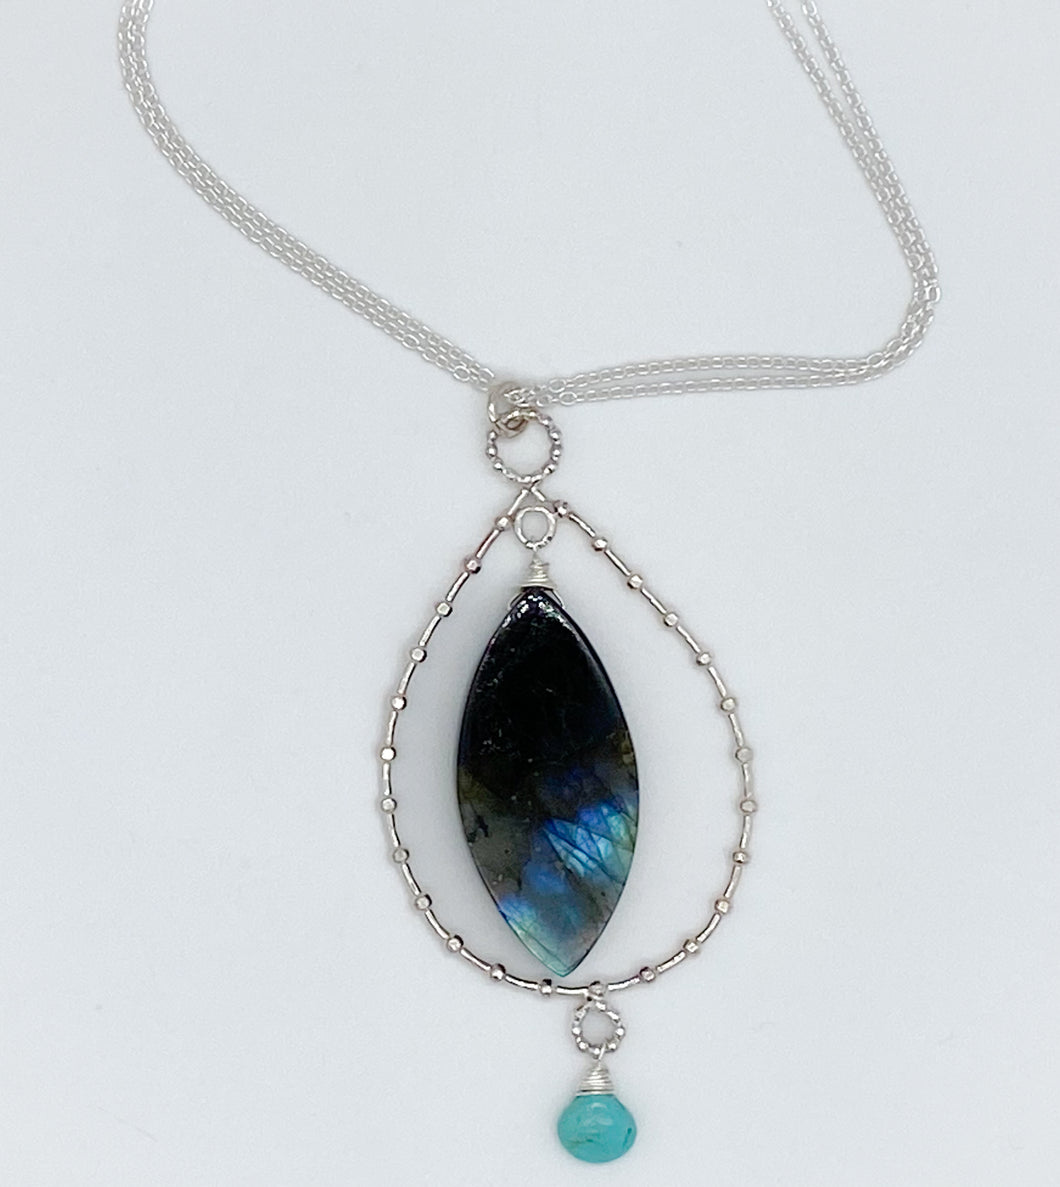 Labradorite, sleeping beauty turquoise, and silver necklace